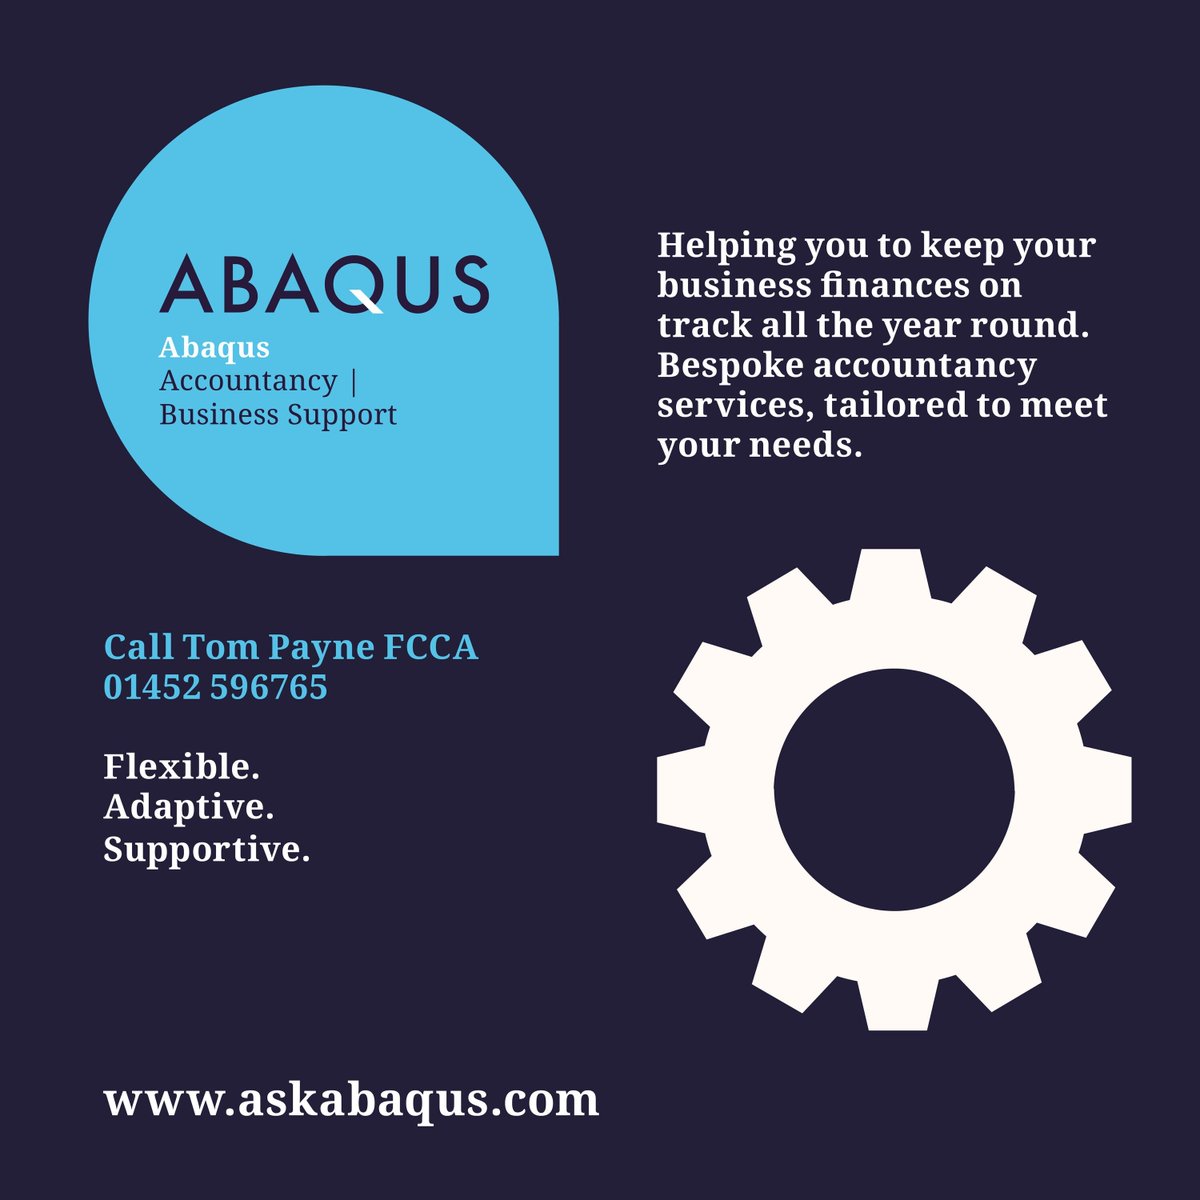 Helping you keep your business finances on track all year round ⚙️ 📅 Ask Abaqus if you need #accountancy support #gloucestershire #business #businesssupport